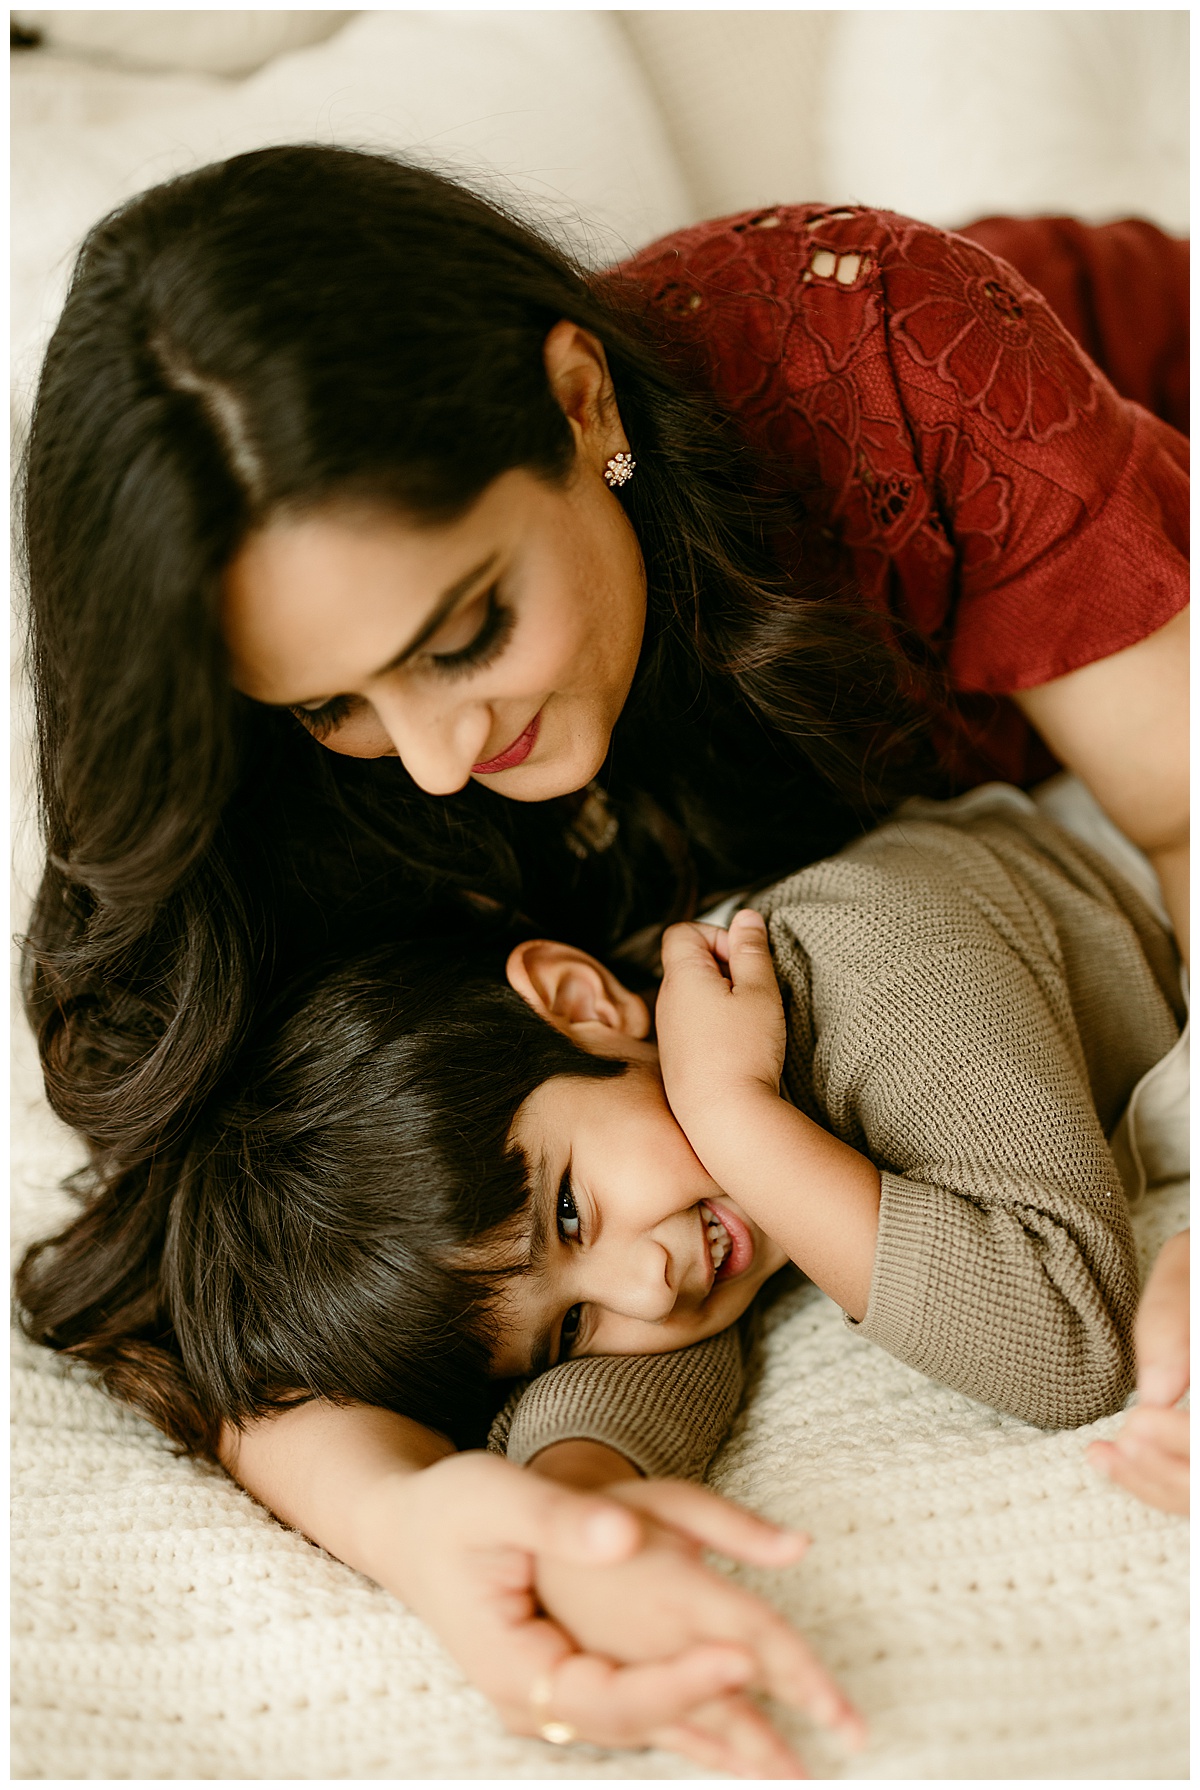 Mom cuddles with young son during their Unposed Lifestyle Shoot